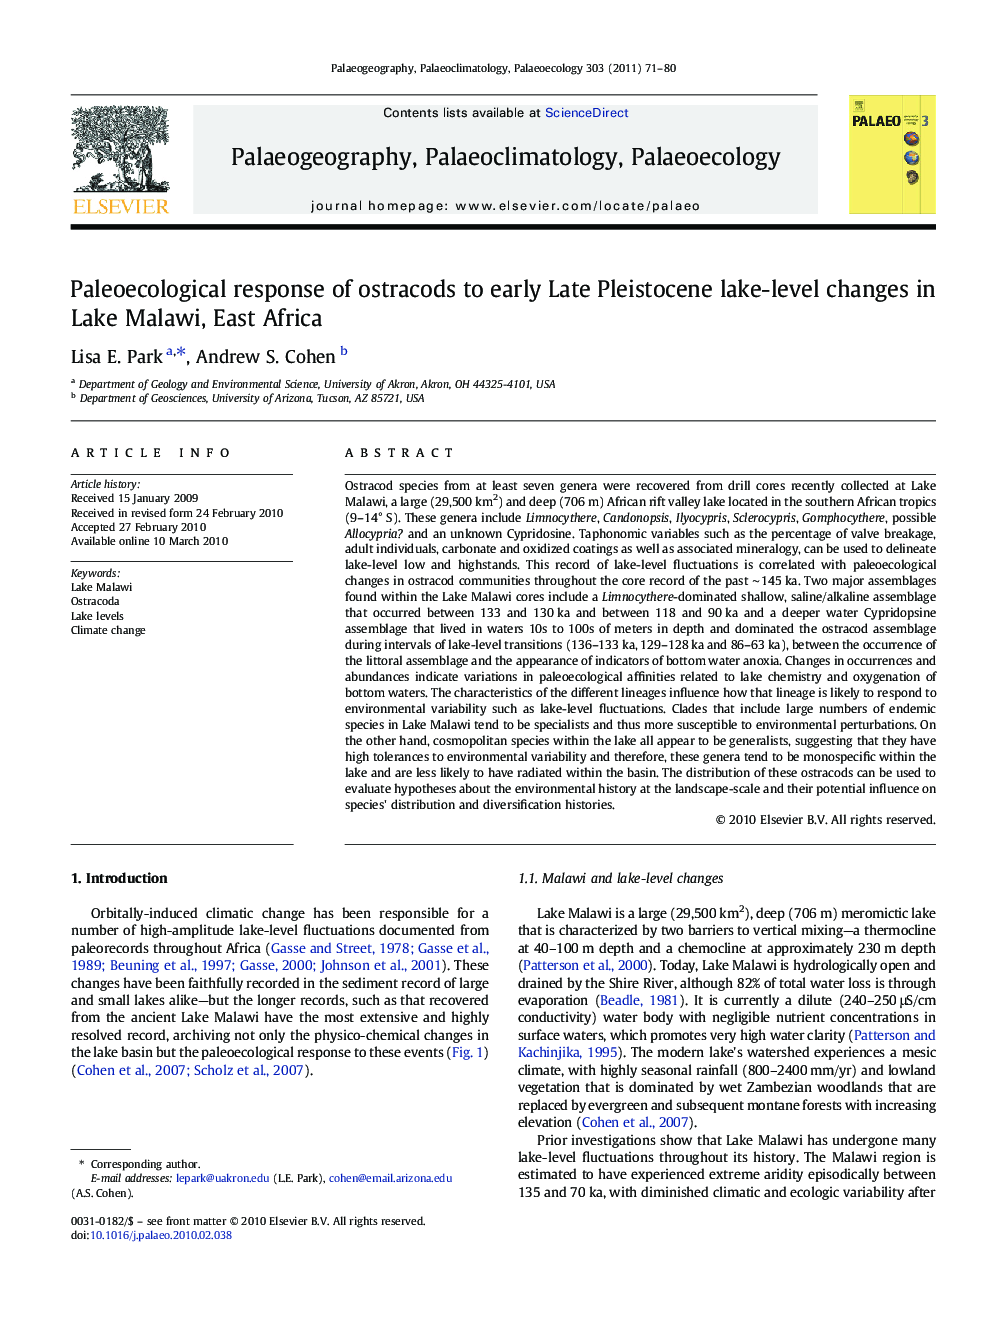 Paleoecological response of ostracods to early Late Pleistocene lake-level changes in Lake Malawi, East Africa